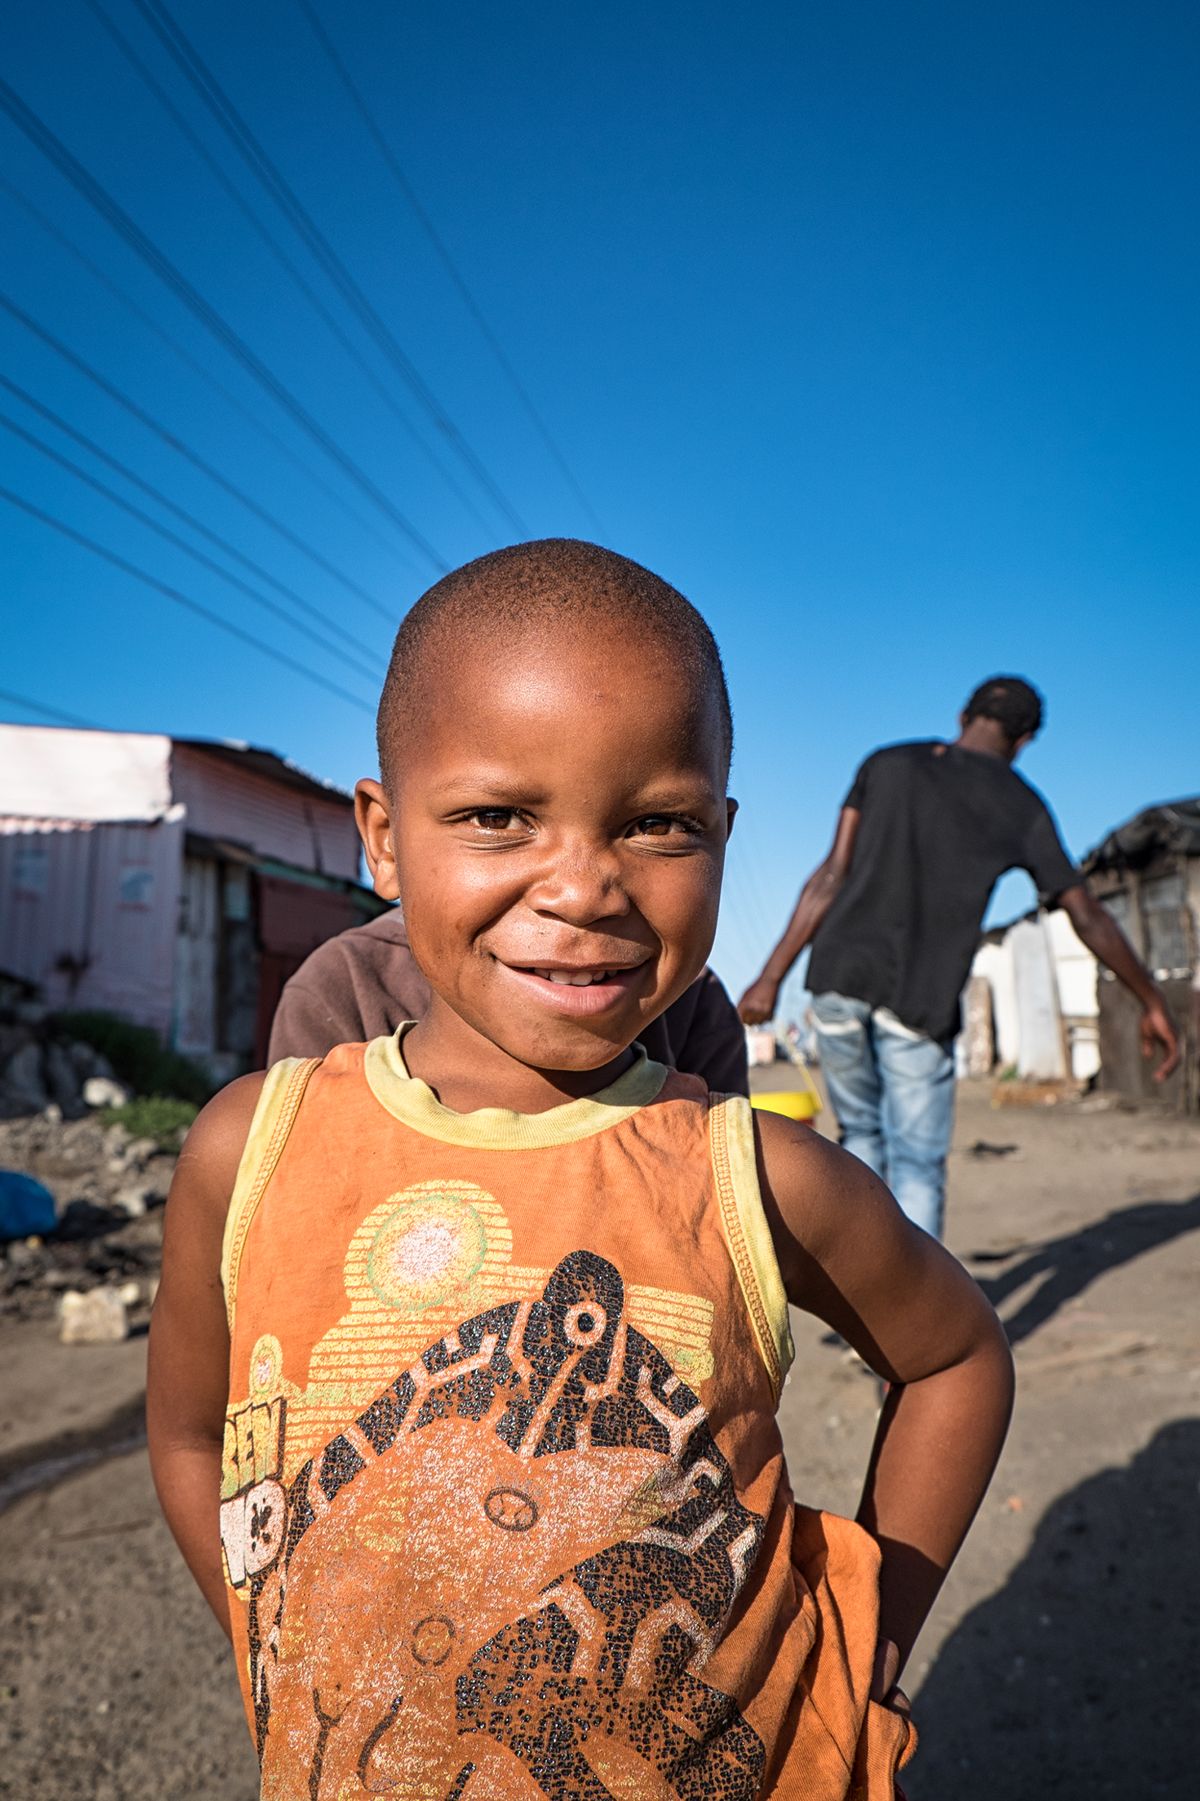 Langa Township south africa cape town portraits colors Graffiti street photography